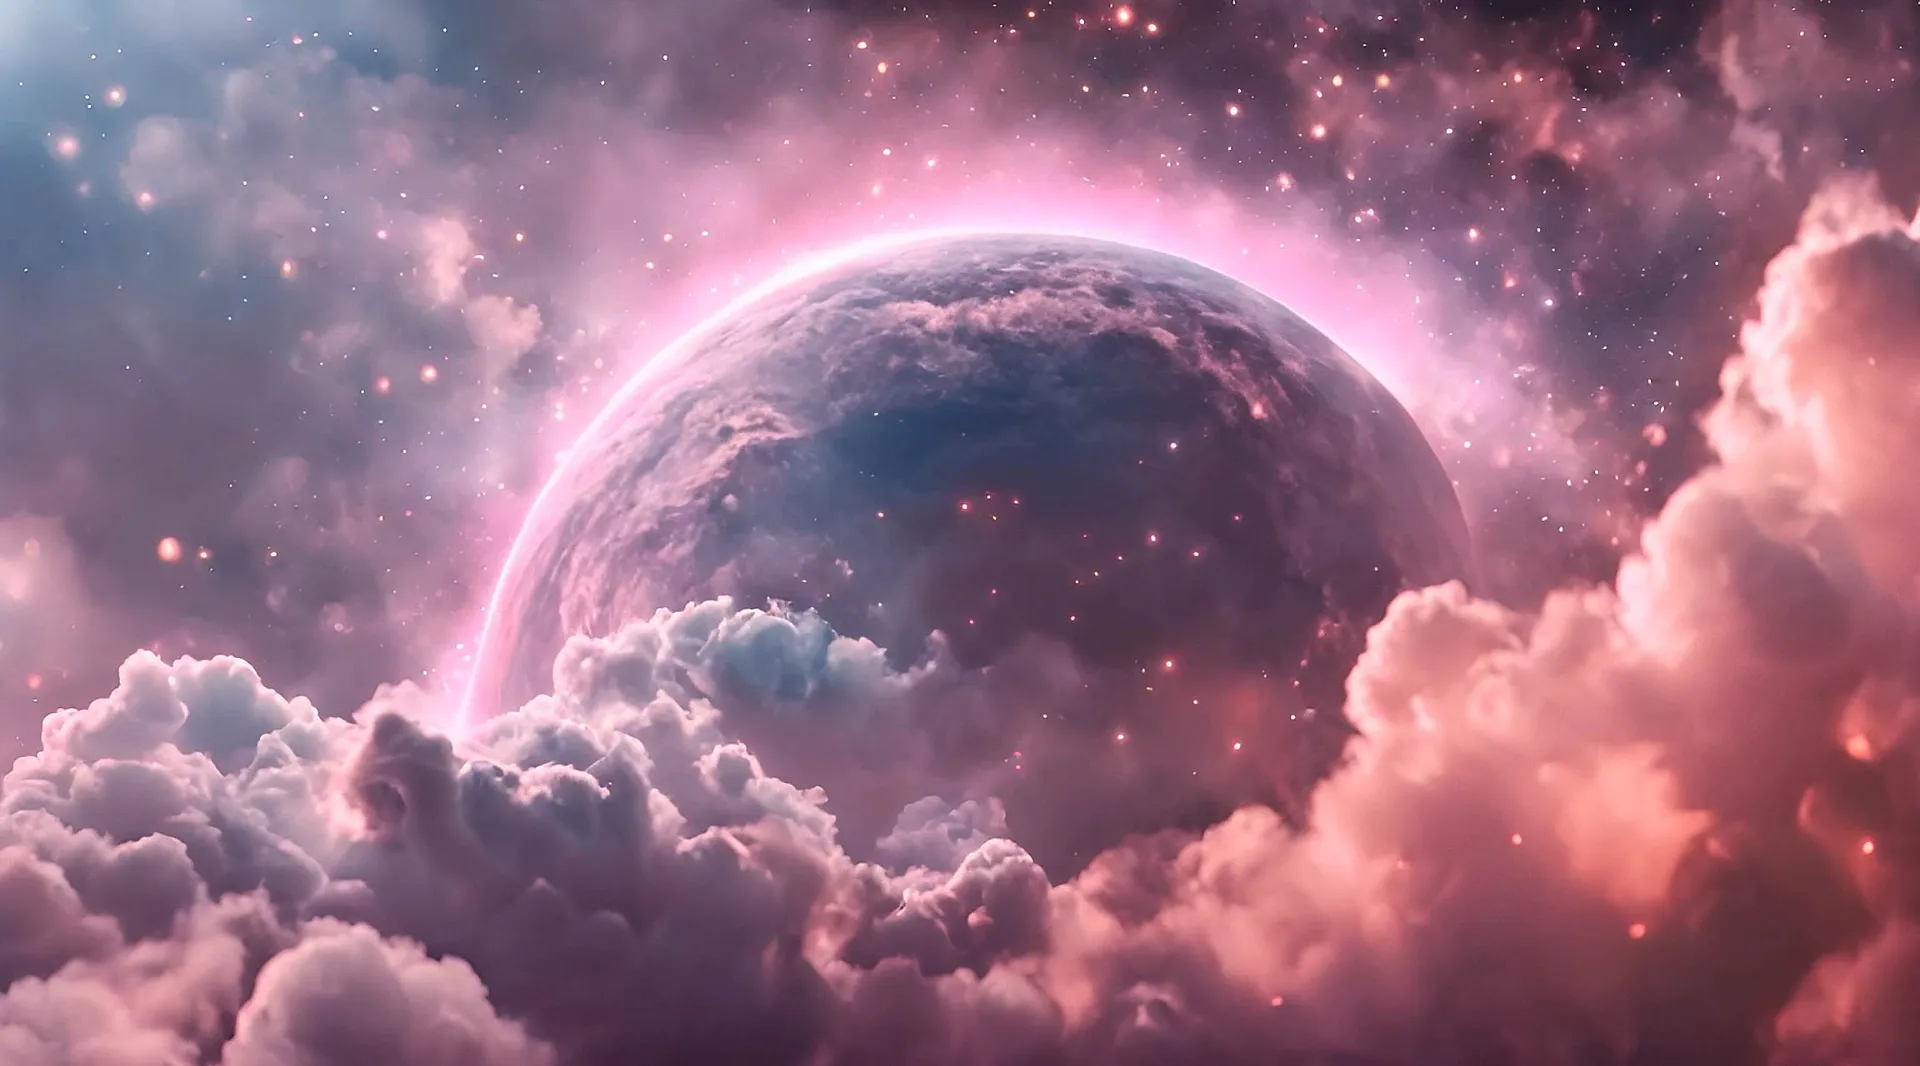 Surreal Space Scene with Celestial Body and Nebulous Clouds